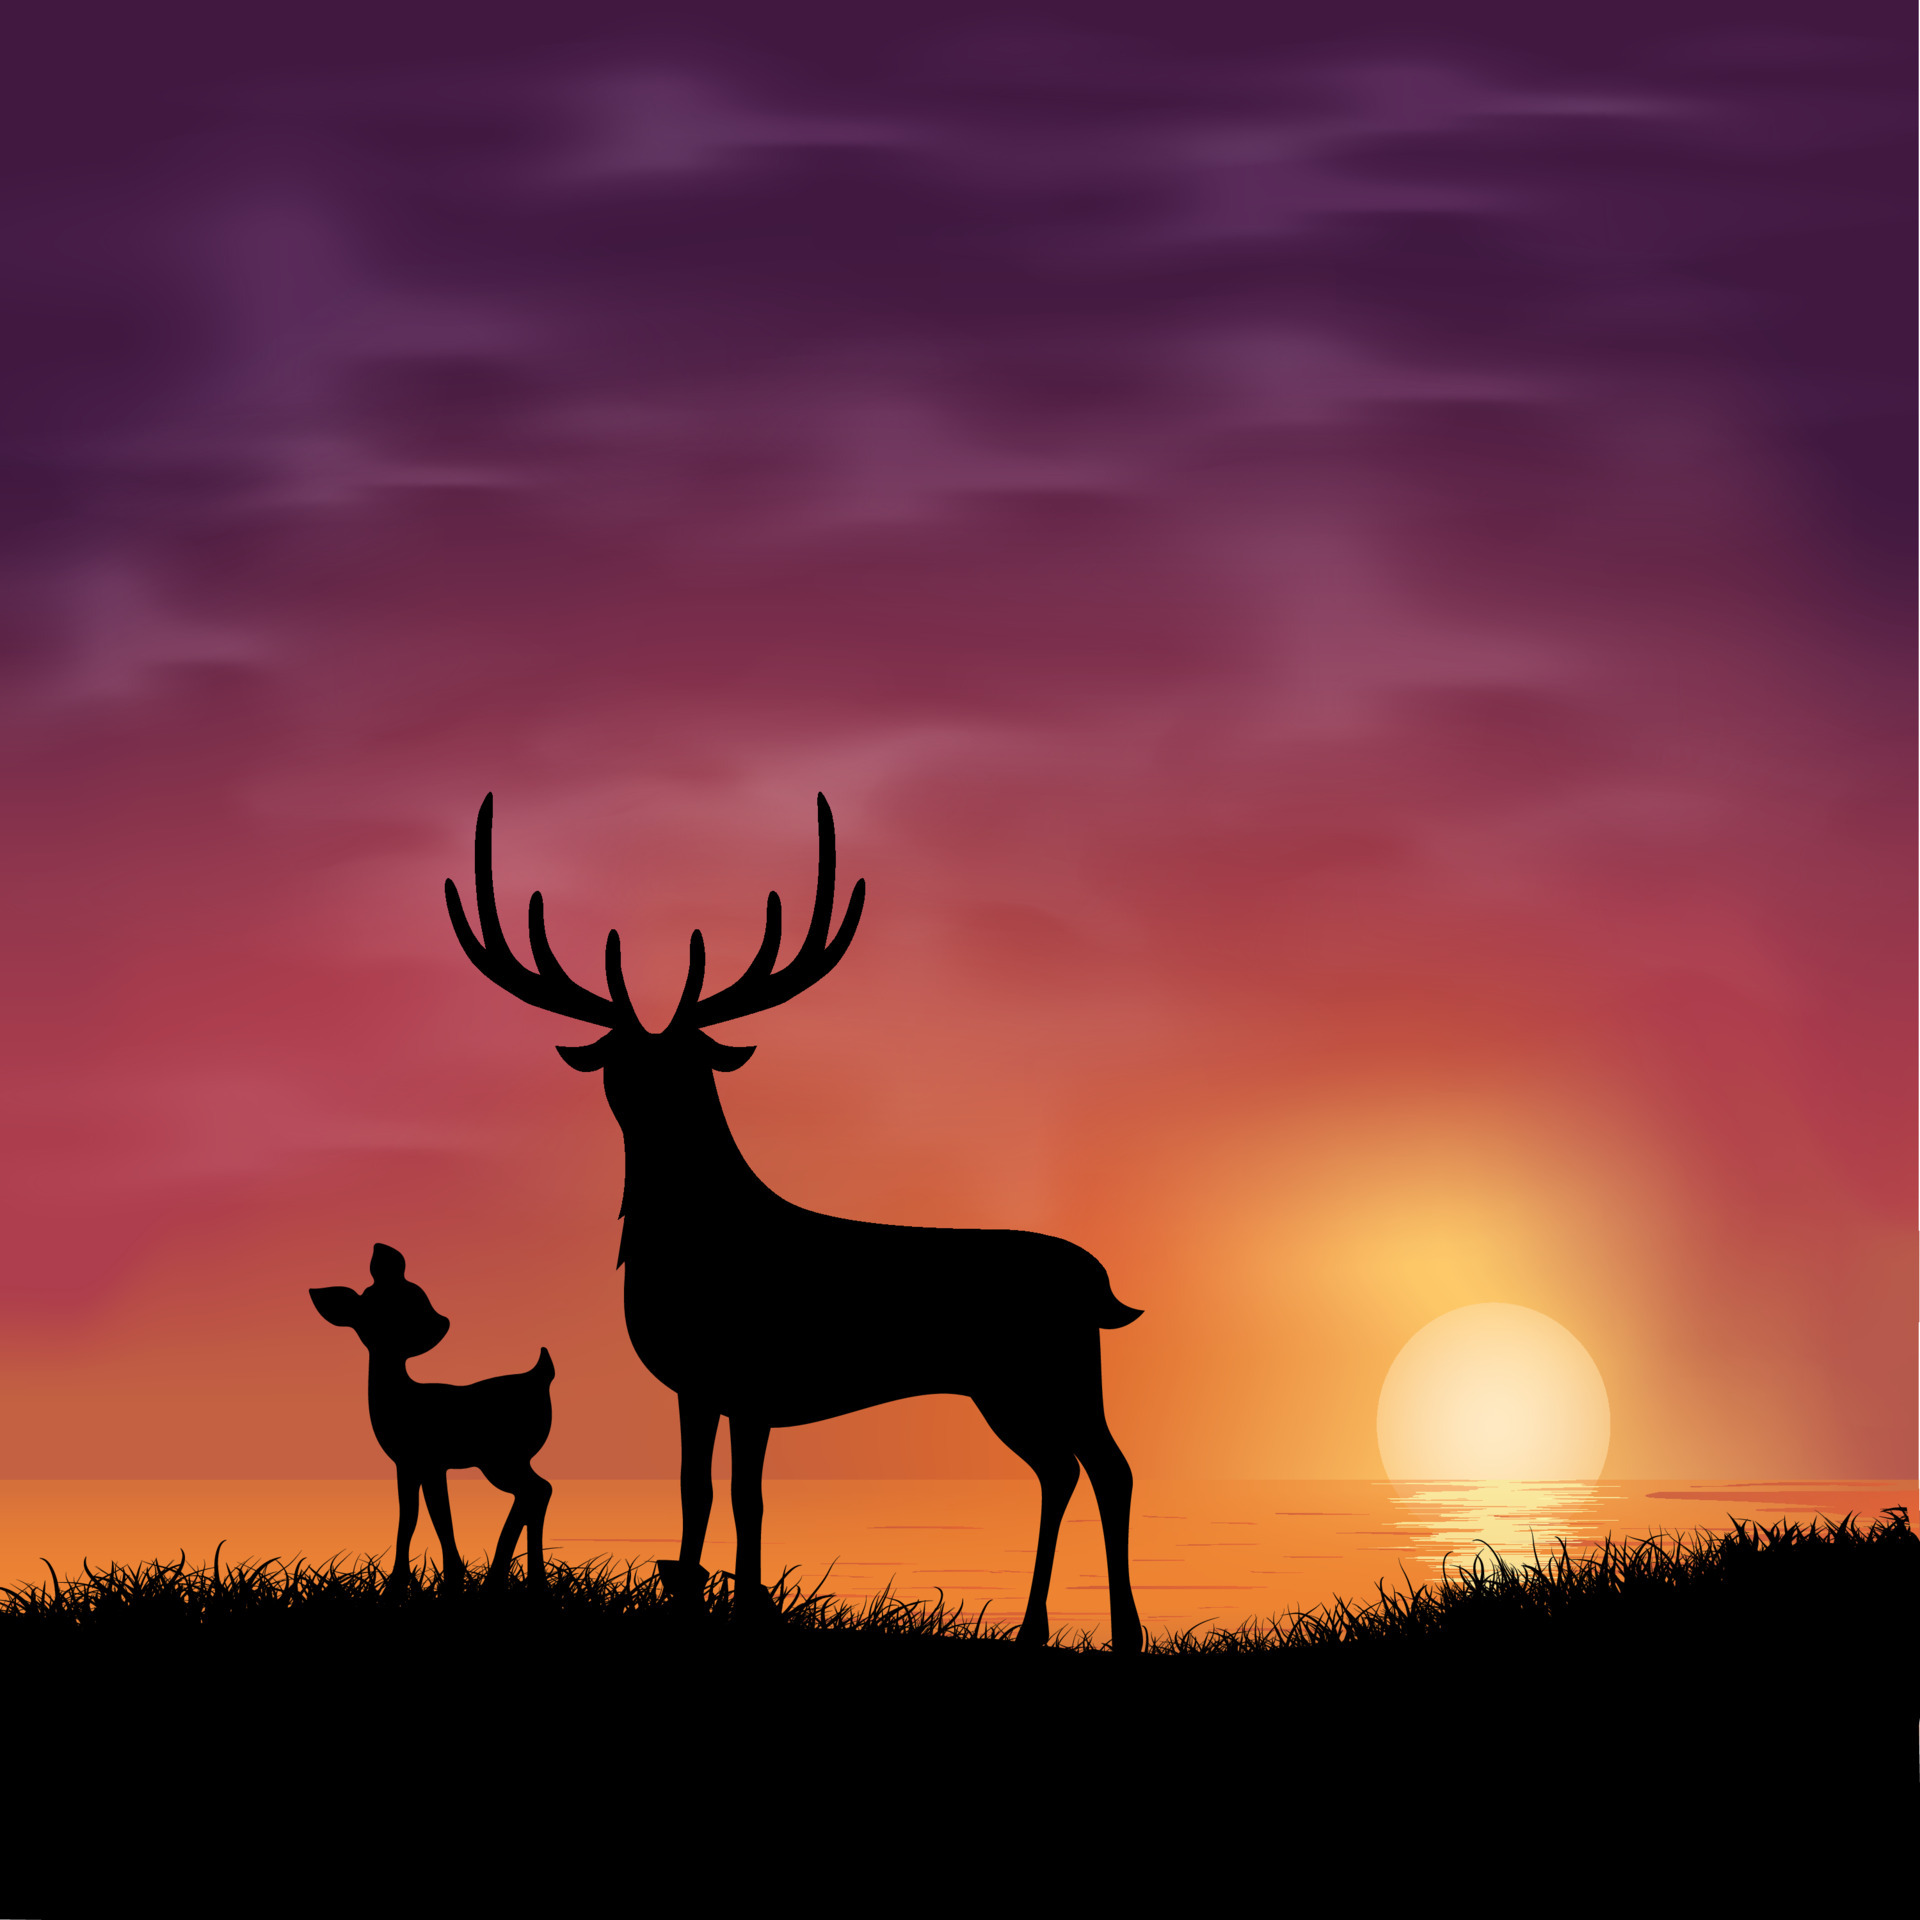 Silhouette of deer on grass field during sunset photo – Free